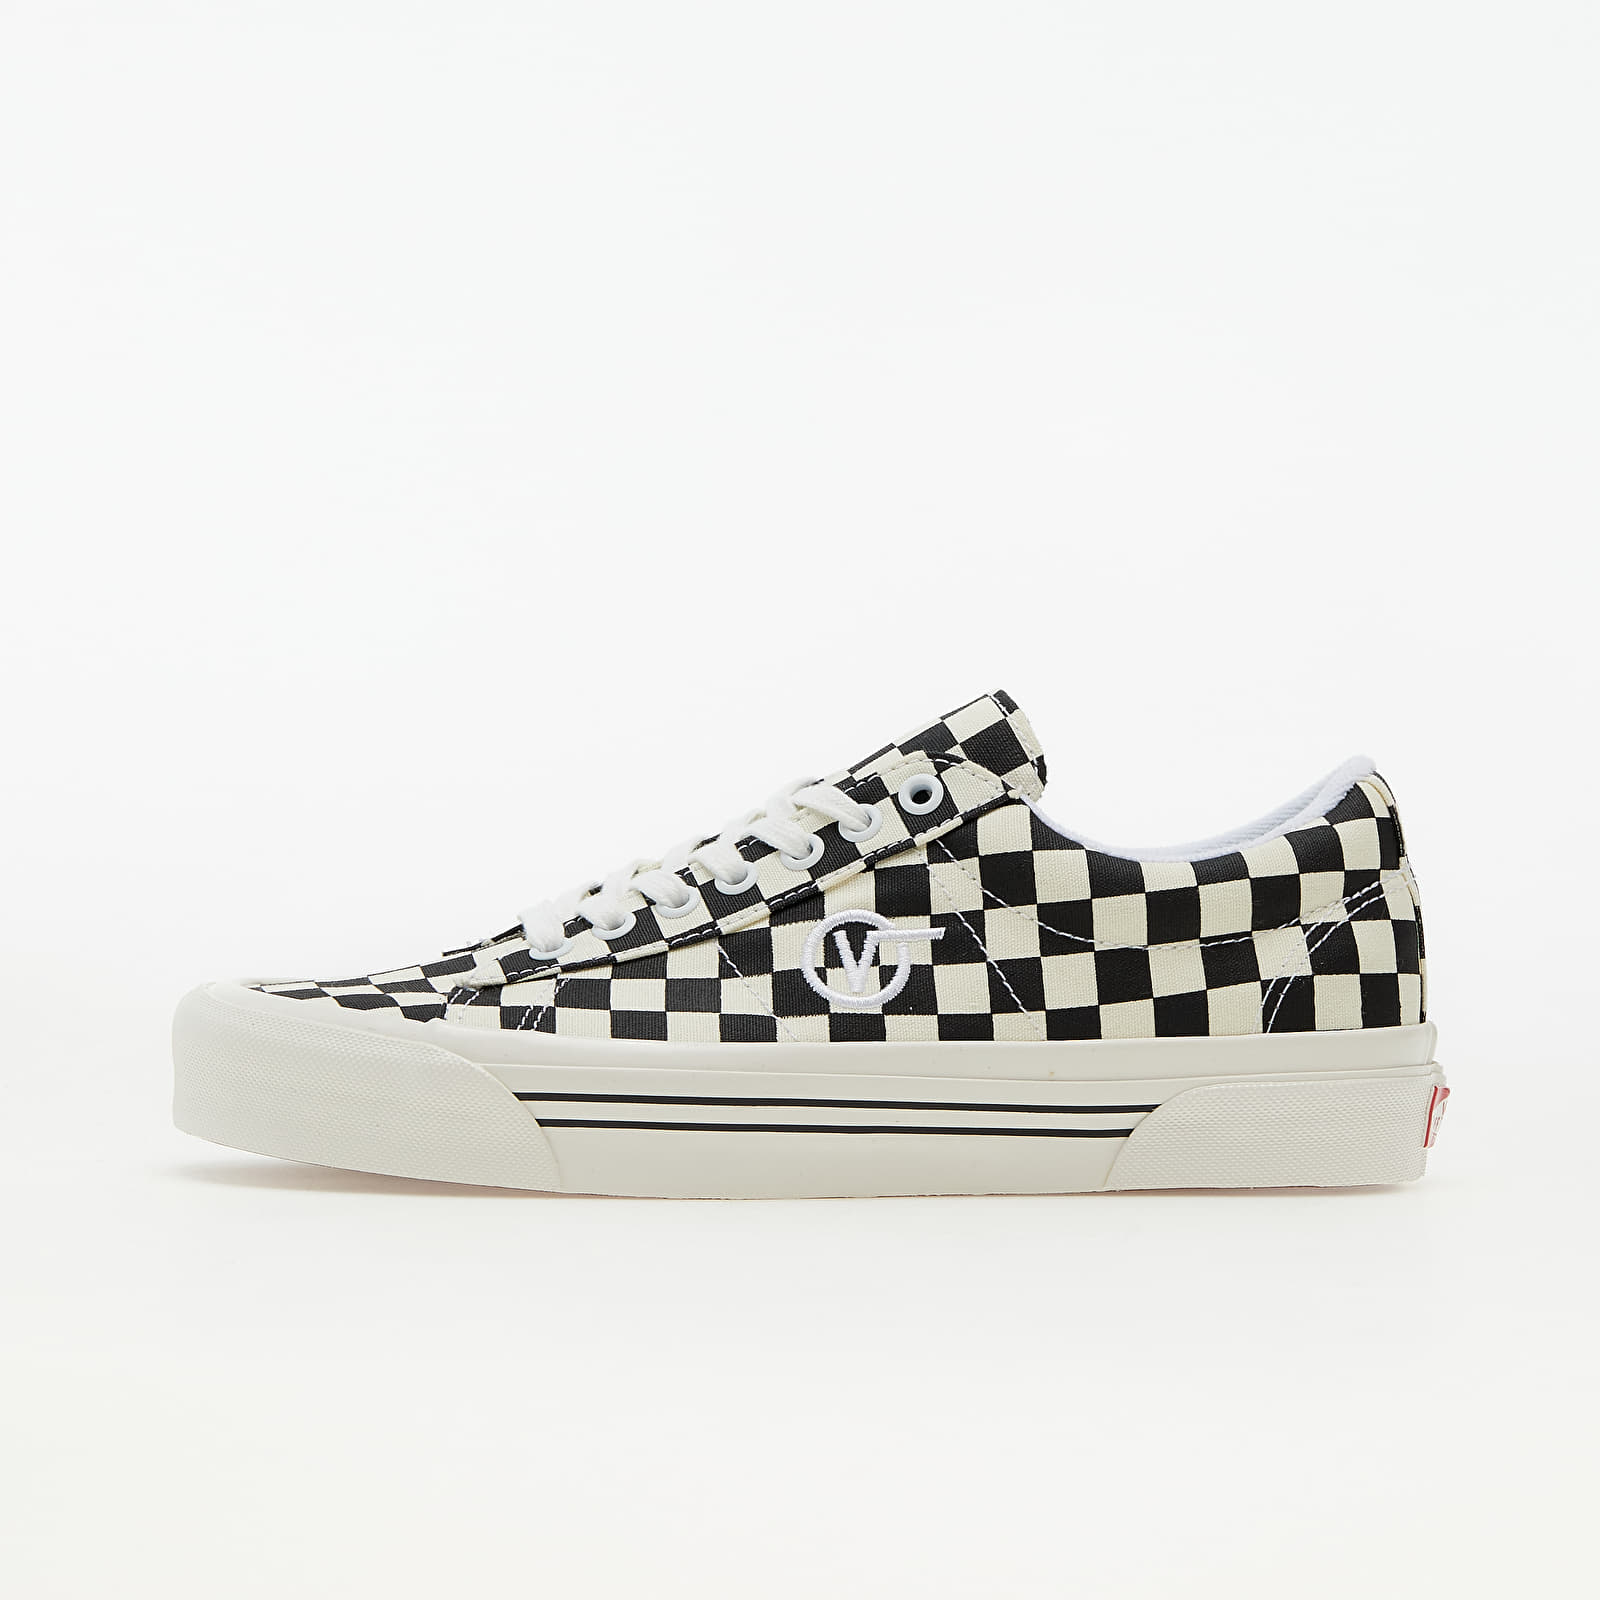 Men's shoes Vans Sid DX (Anaheim Factory) Og White/ Checkerboard